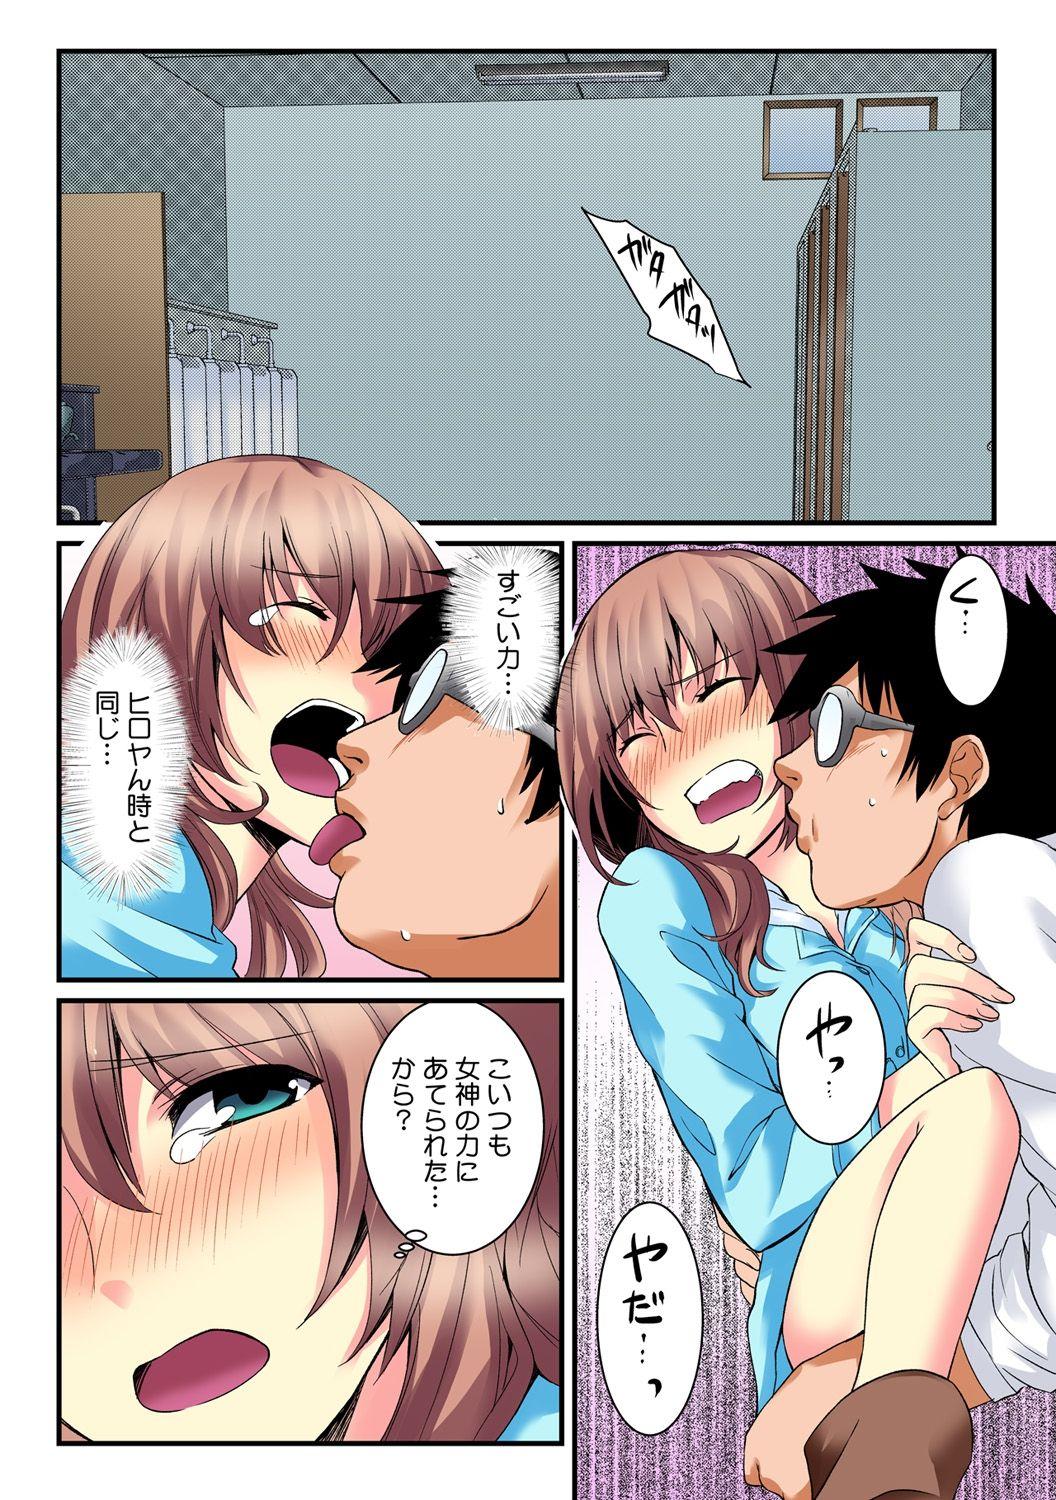 [Akagi Gijou / Akahige] I became a girl- and I definitely can't let anyone find out! (Full color) 2 22